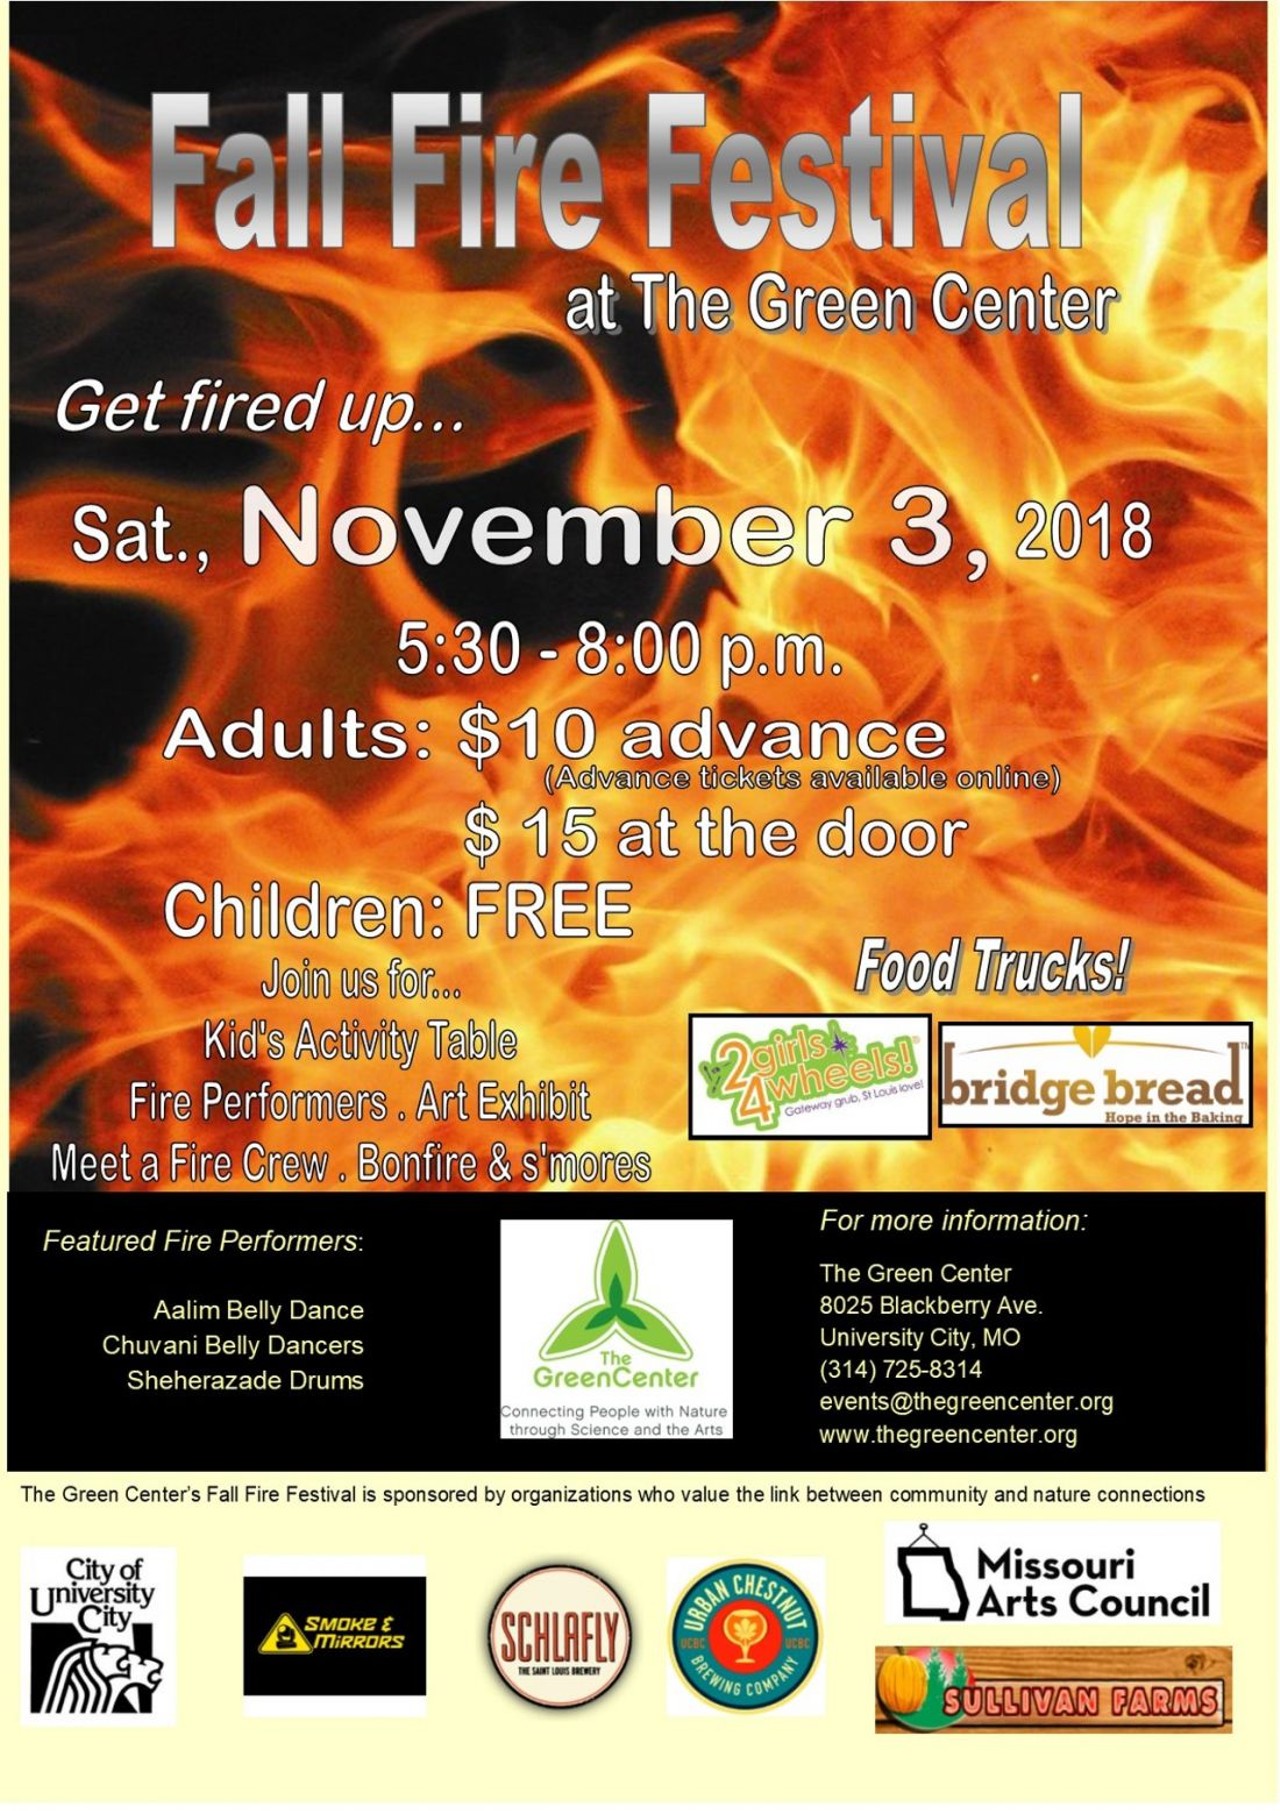 Fall Fire Festival at the Green Center
November 3, 2018
Get warm around a bonfire as you make s'mores and watch fire performers! This celebration of all things pyro is free for kids under twelve and adult tickets are only $10 in advance.
Check it out here.
Photo courtesy of thegreencenter